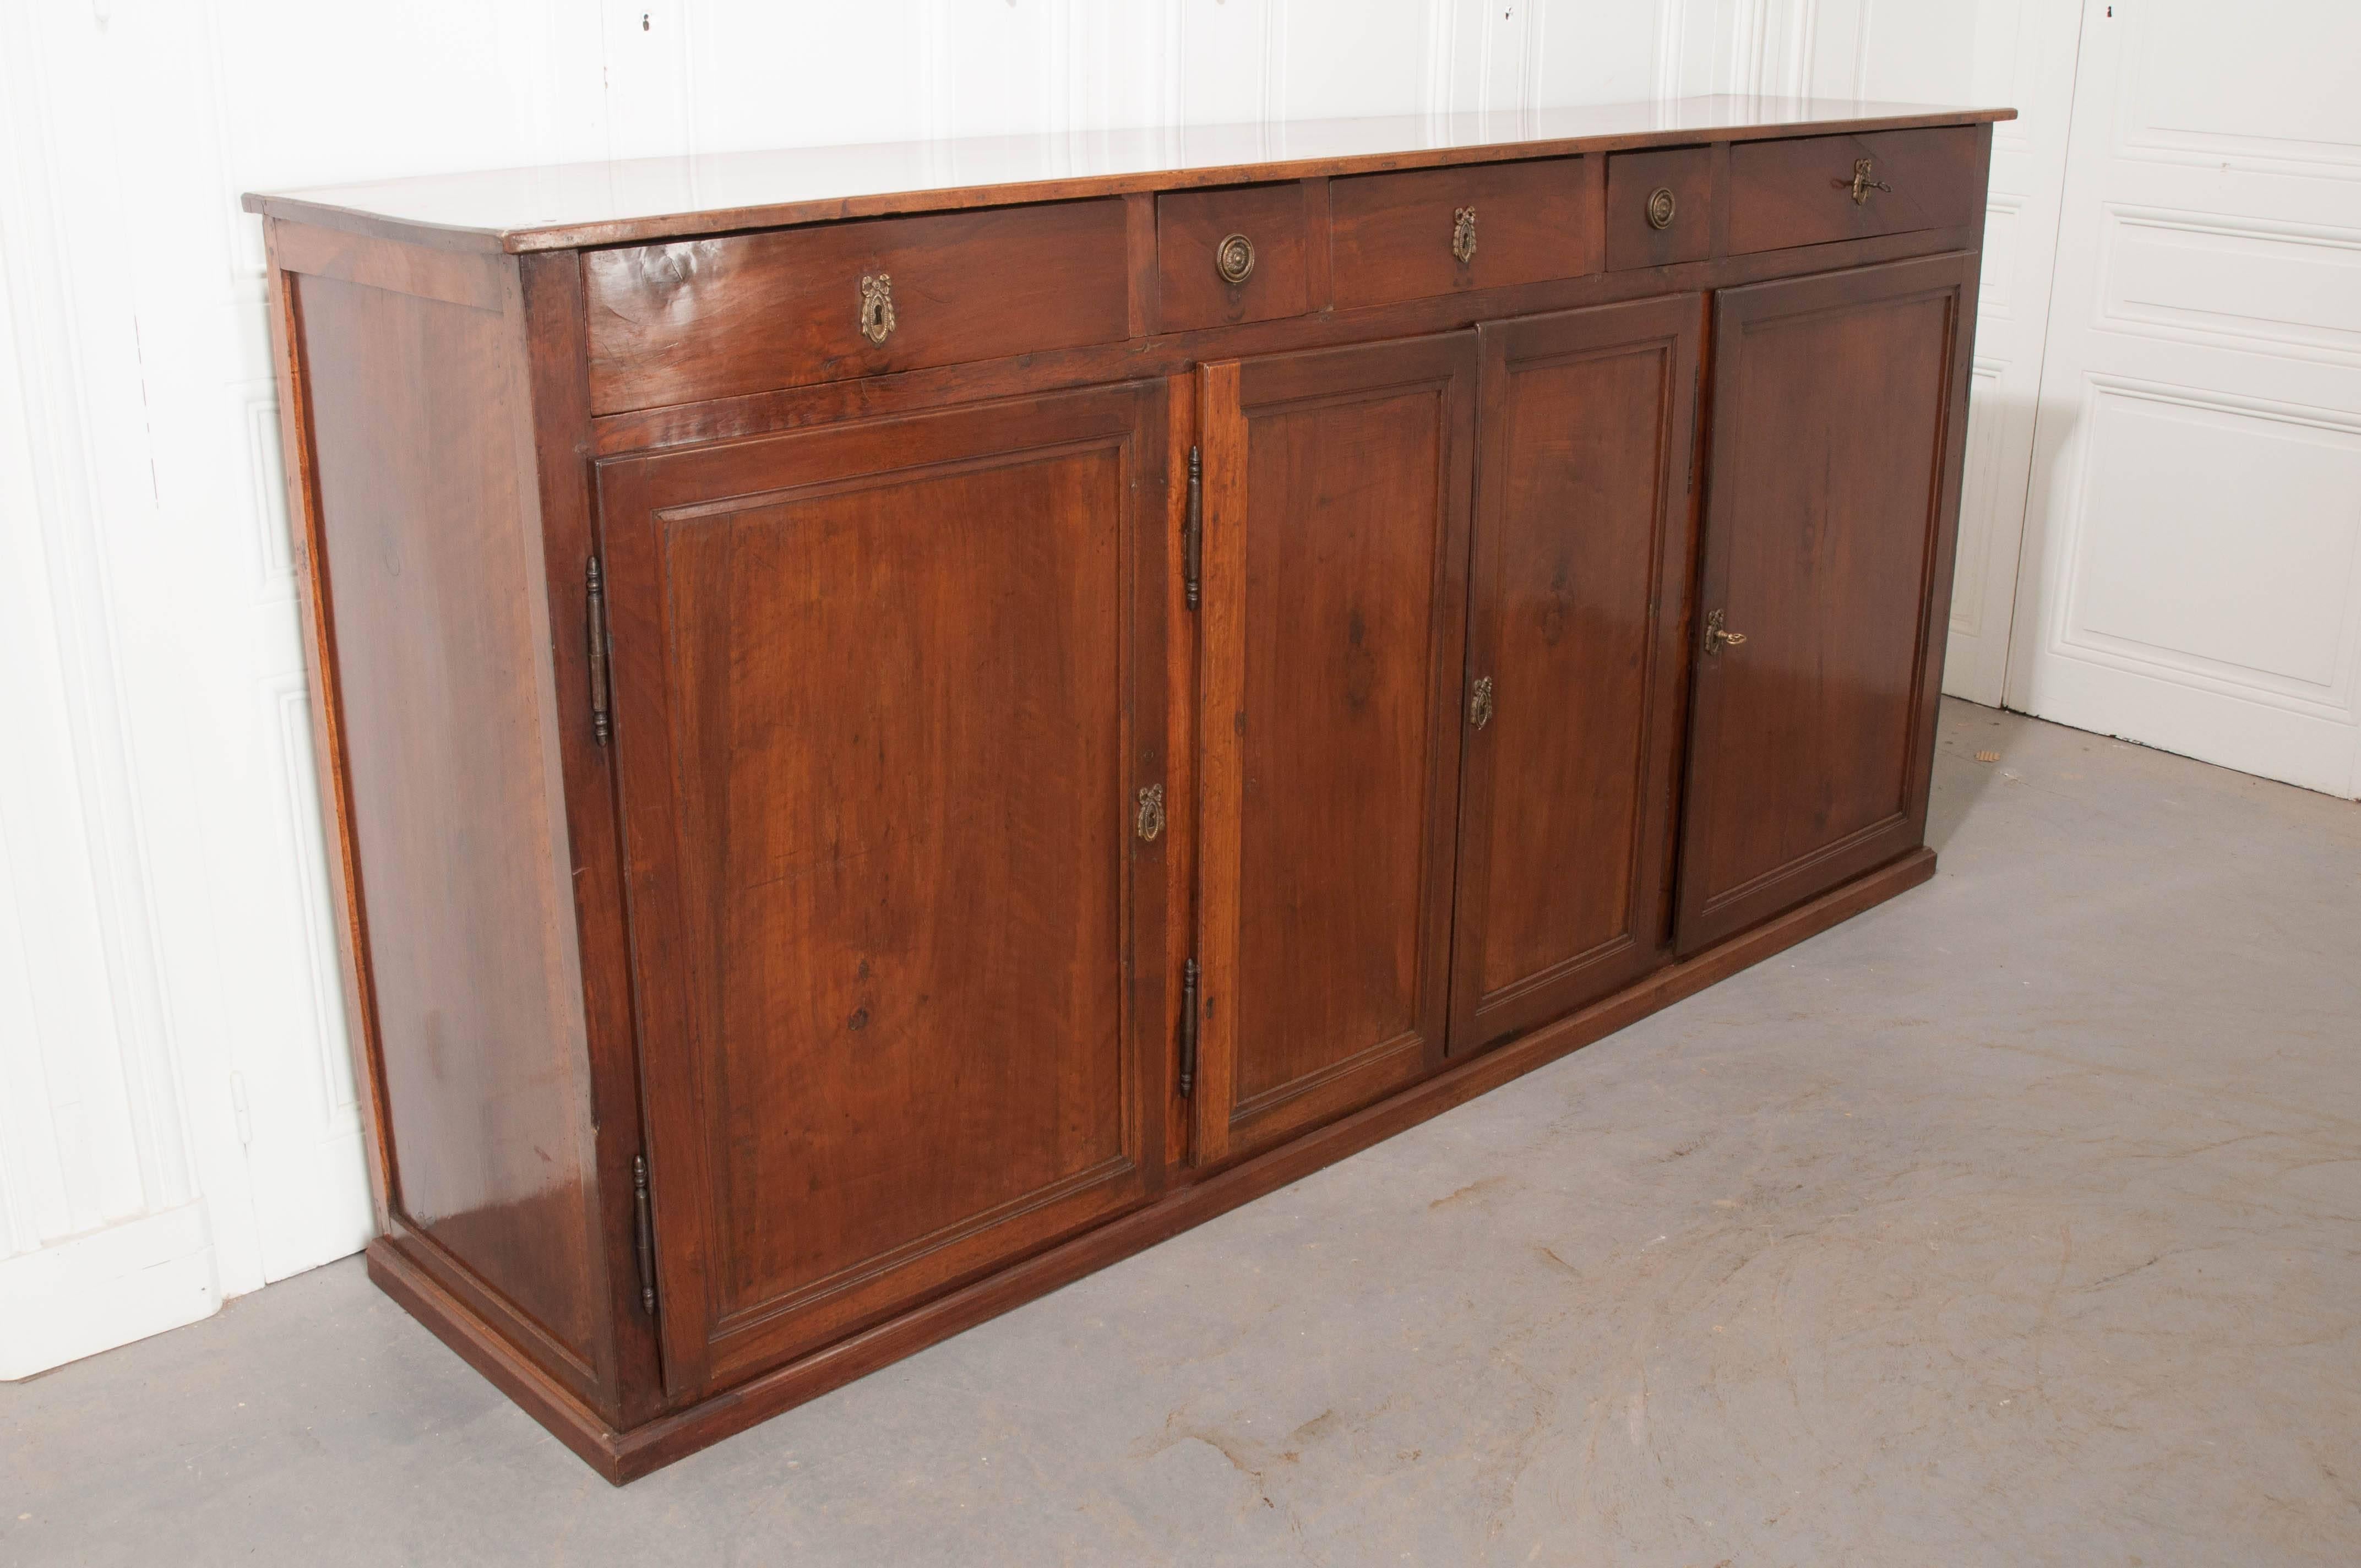 A sizable mahogany sideboard from 19th century England. This four-door case piece features three interior storage cavities as well as five drawers, and has been influenced by the French Louis XVI style. All doors and drawers that are lockable